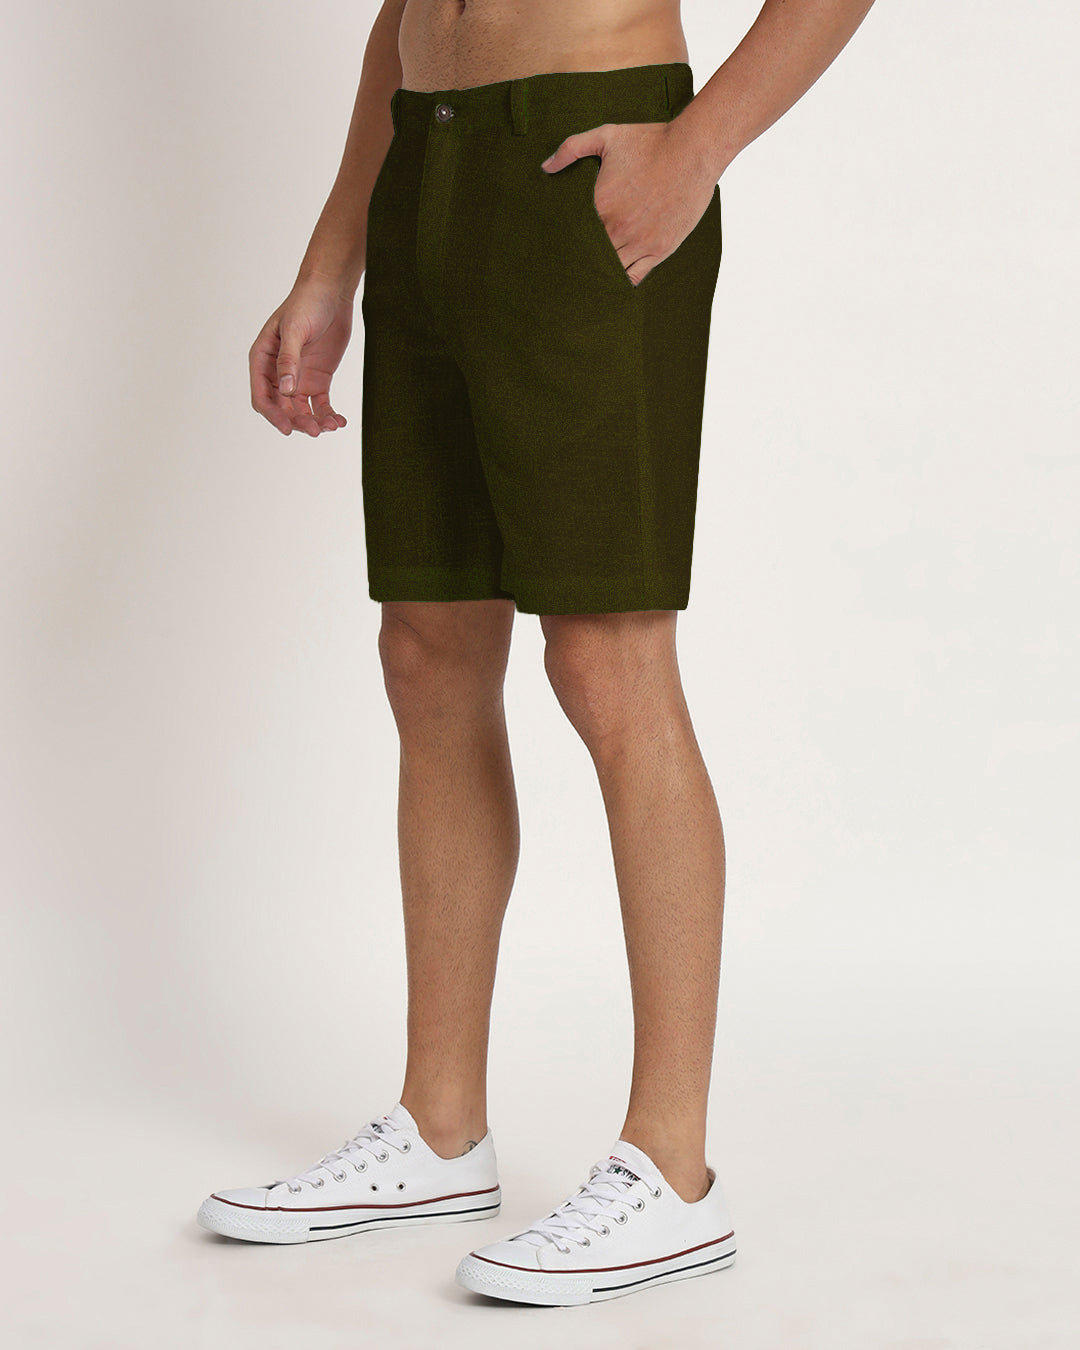 Combo : Ready For Anything Olive Green & Grey Men's Shorts